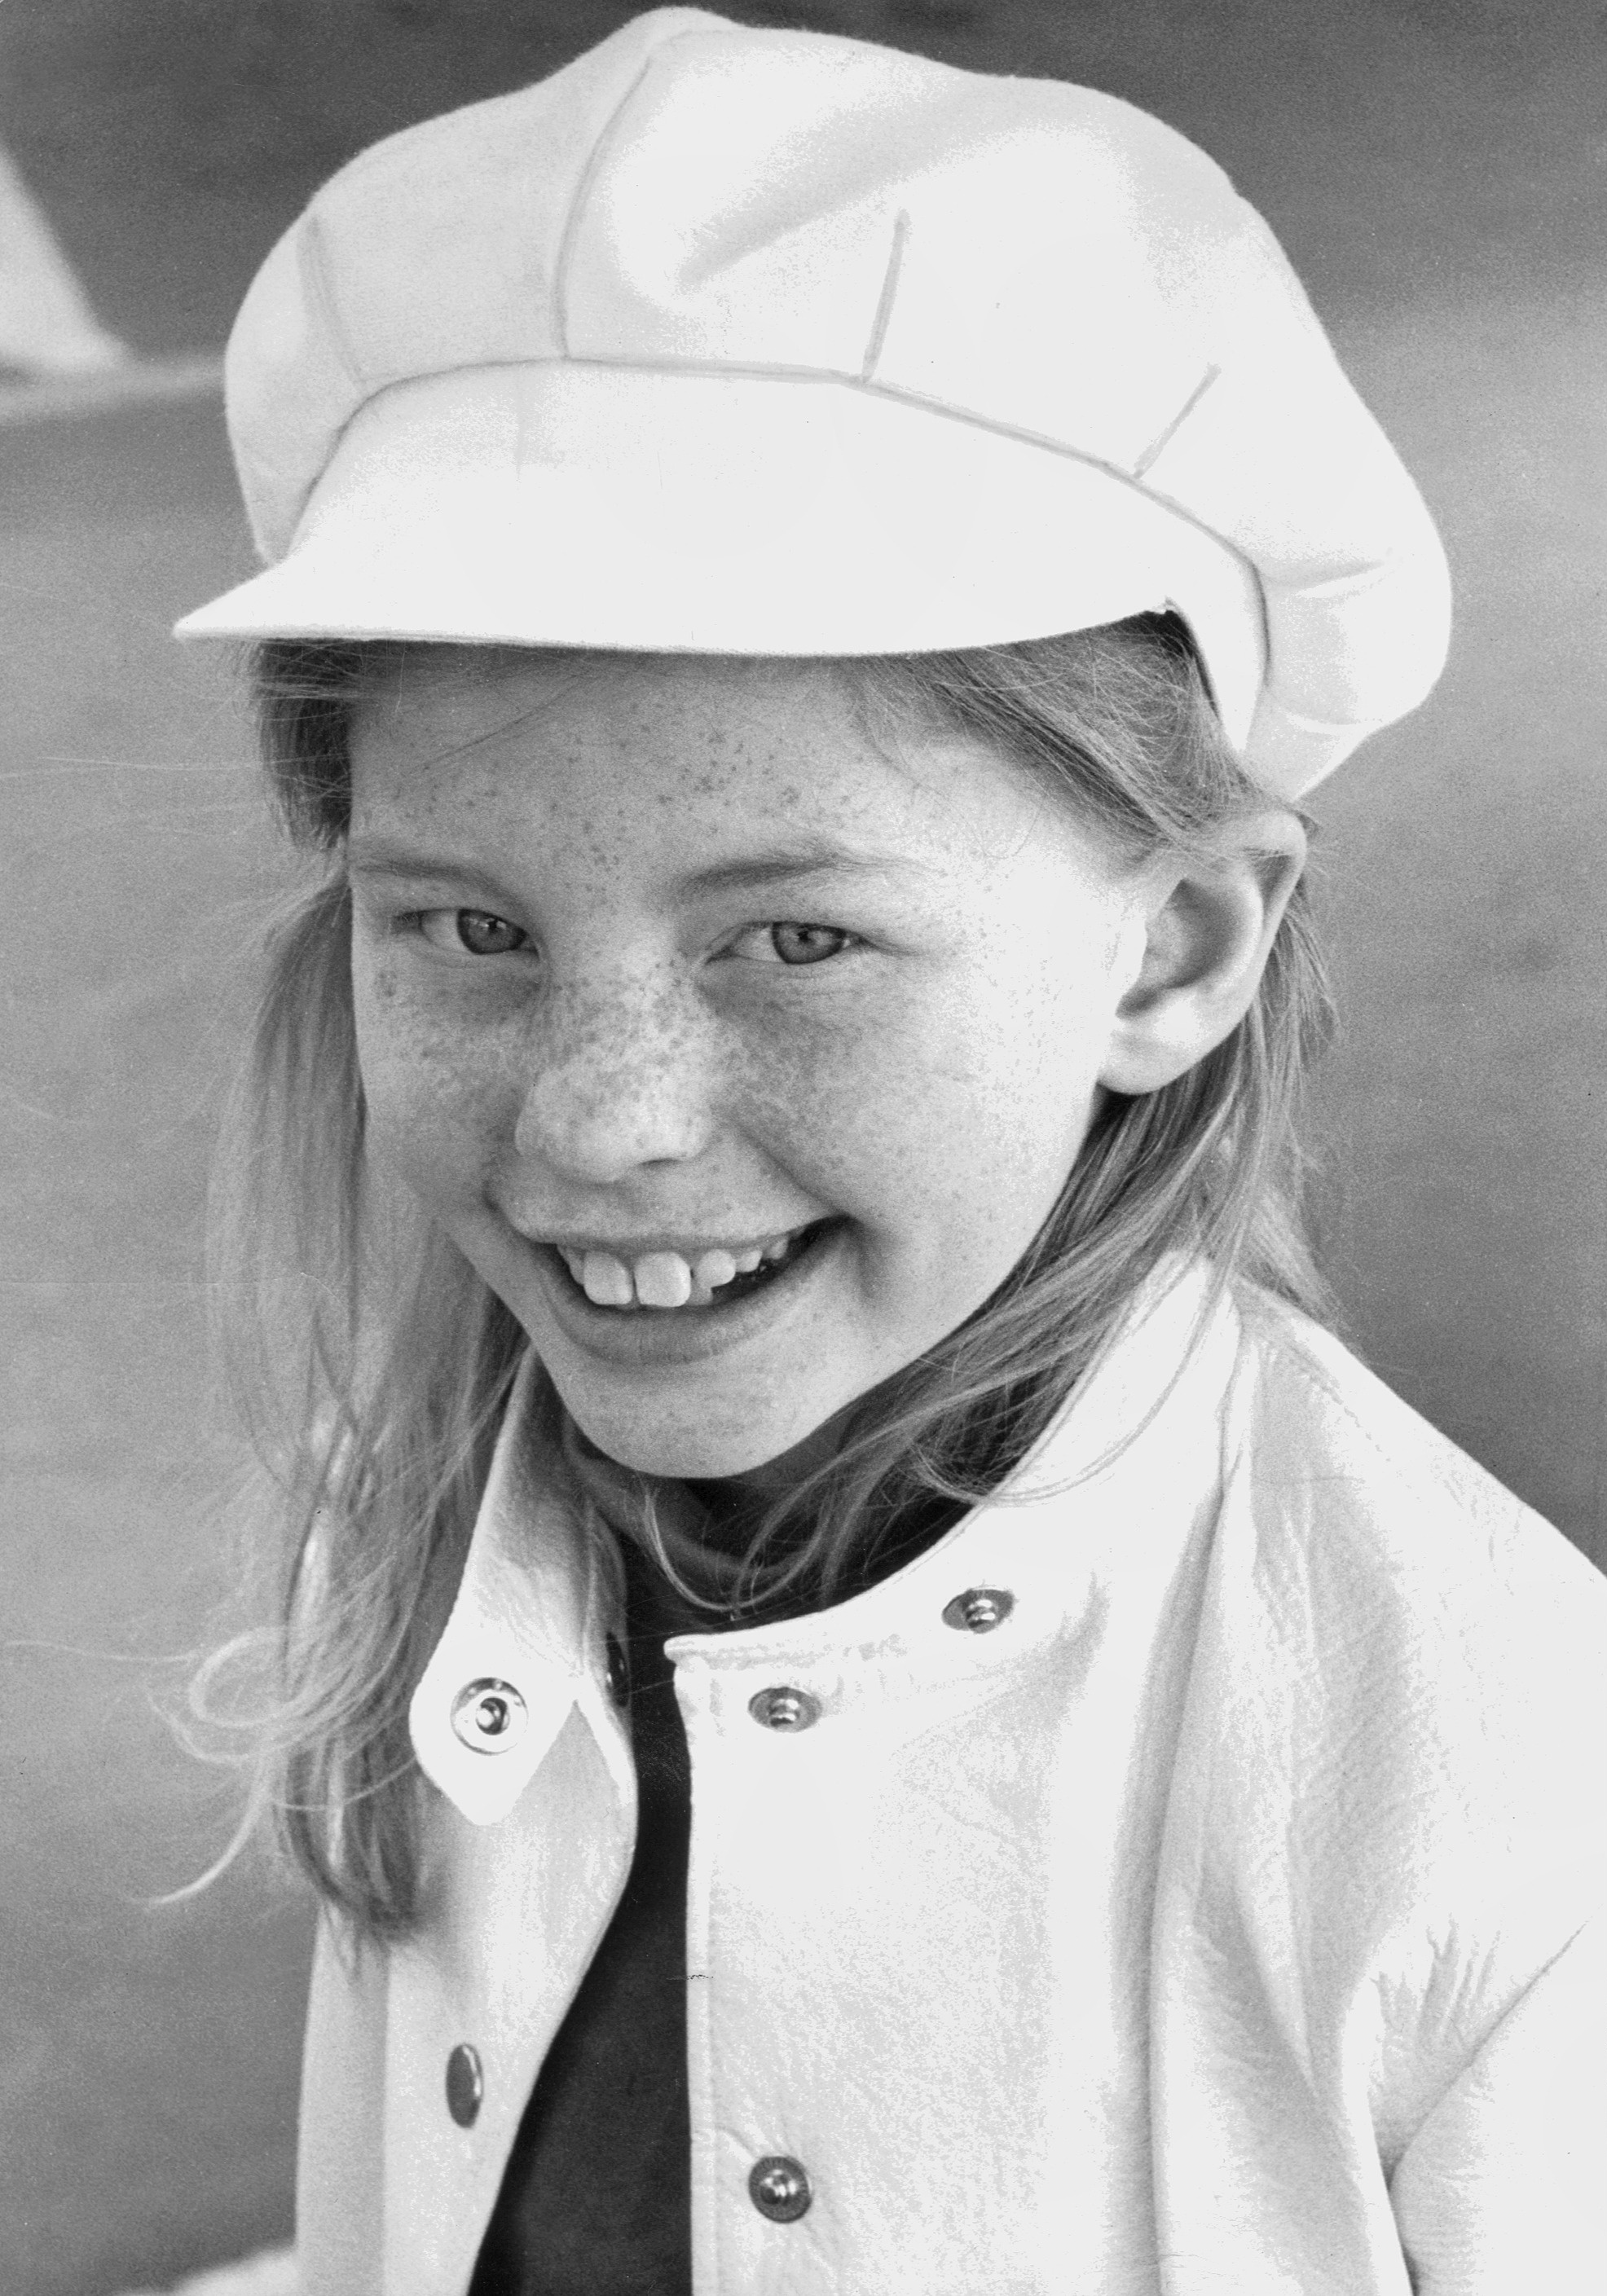 . The Swedish actress Inger Nilsson, known for her role as Pippi Longstocking, during a visit to Munich in 1969. Date: 01/01/1969. © Alfred Haase / Süddeutsche Zeitung Photo (Germany).